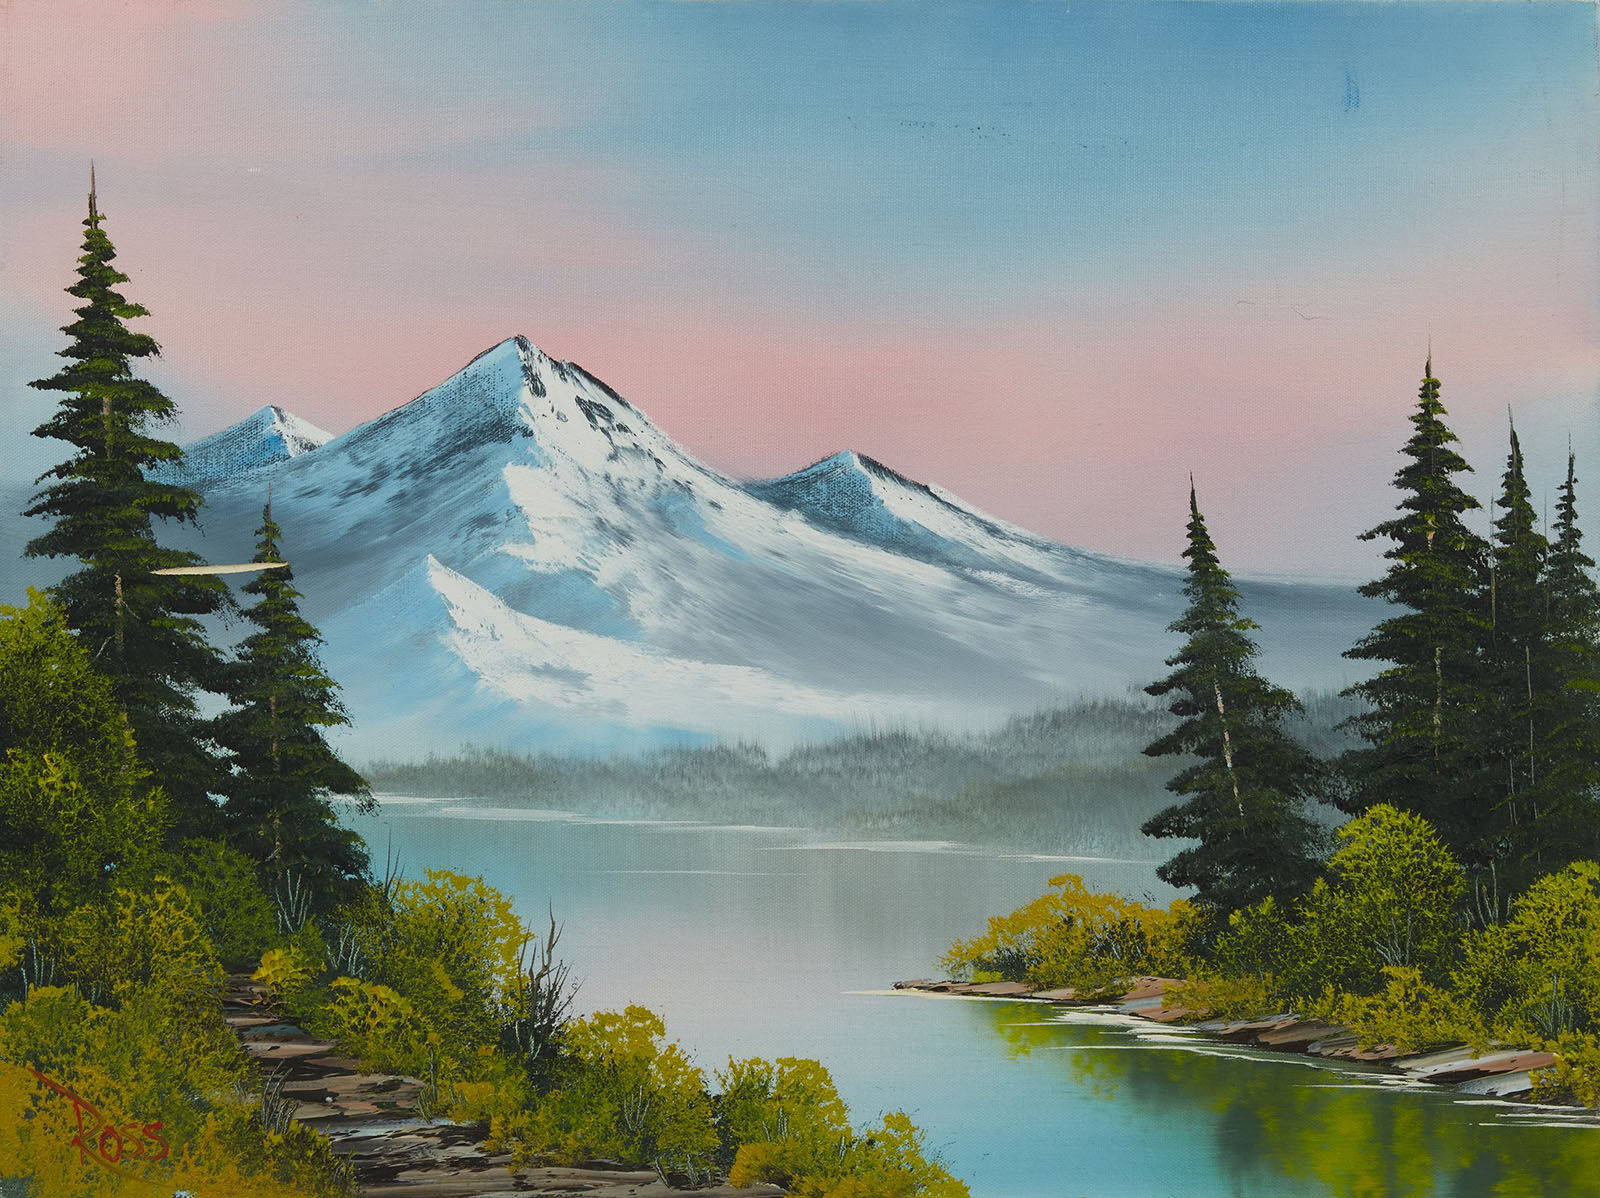 Bob Ross, Forest Hills, Original Oil Painting, 1989. Image Used with Permission © Modern Artifact.